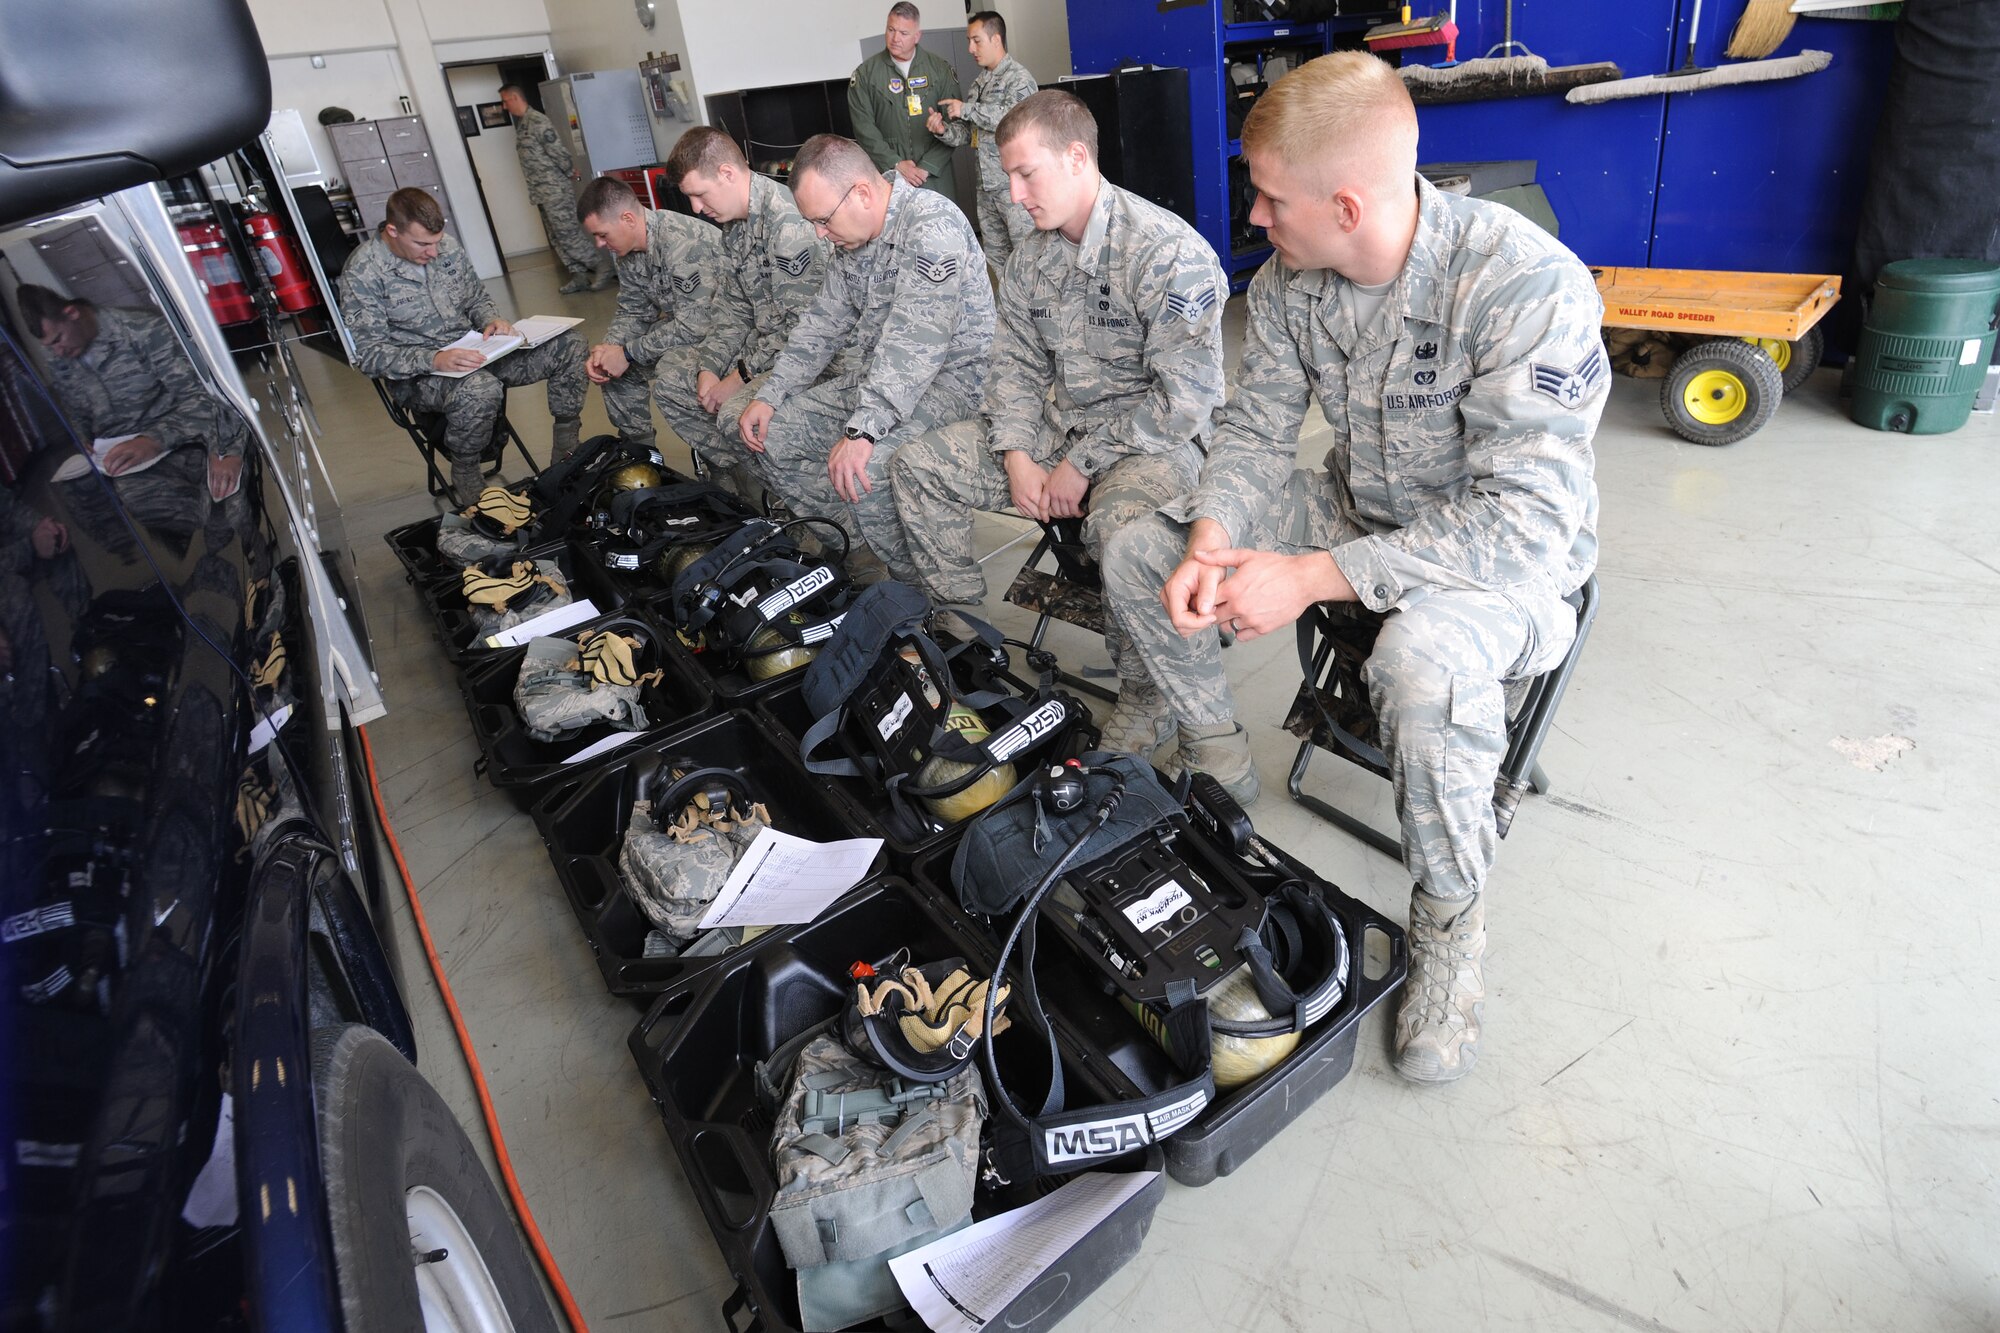 39th Civil Engineer Squadron explosive ordnance disposal technicians, test self contained breathing apparatus equipment during a readiness inspection May 2, 2014, Incirlik Air Base, Turkey. The United States Air Forces in Europe inspector general team visited Incirlik AB to conduct a readiness inspection of the 39th Air Base Wing.  (U.S. Air Force photo by Senior Airman Nicole Sikorski/Released)